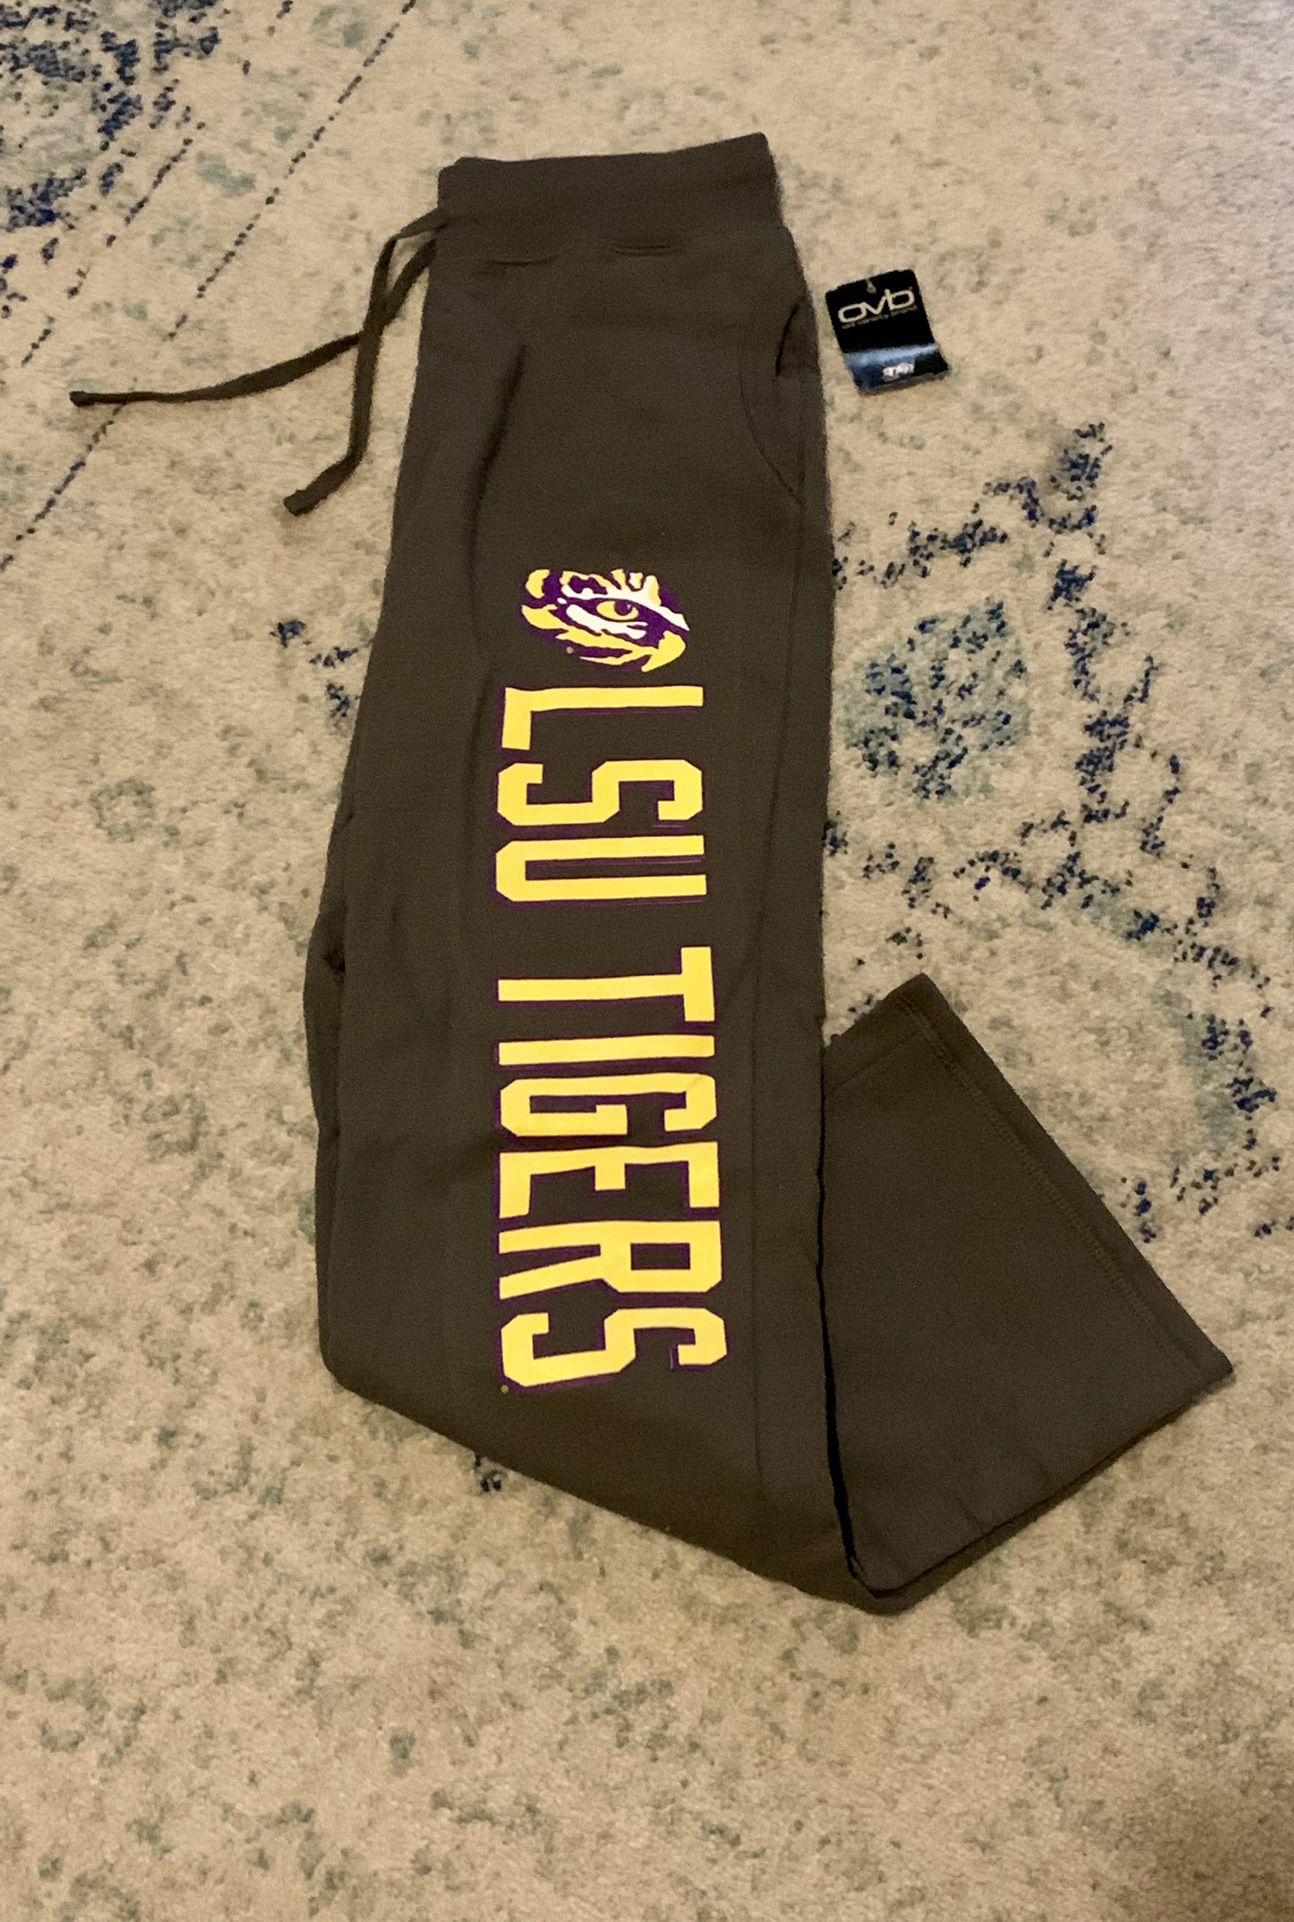 LSU TIGERS Women’s Grey Sweatpants With Pockets Size Medium Brand New With Tags 